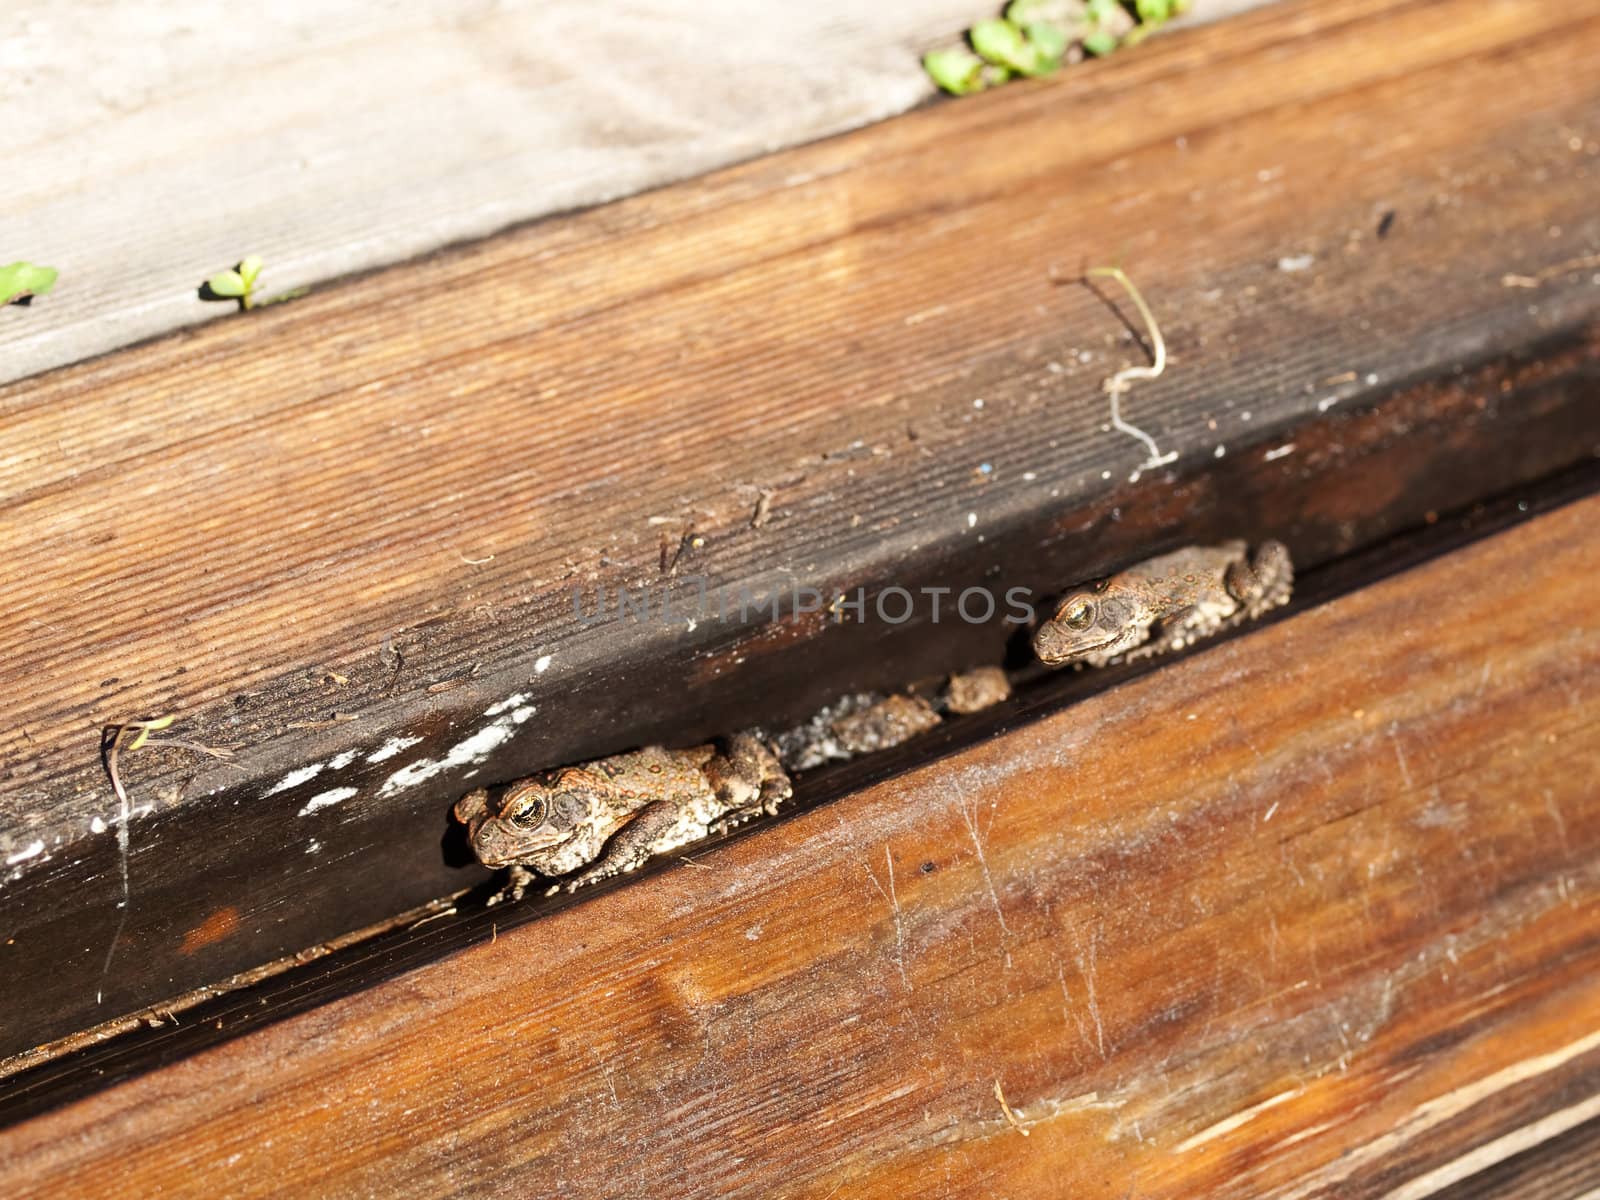 Cane toads sheltering by sherj